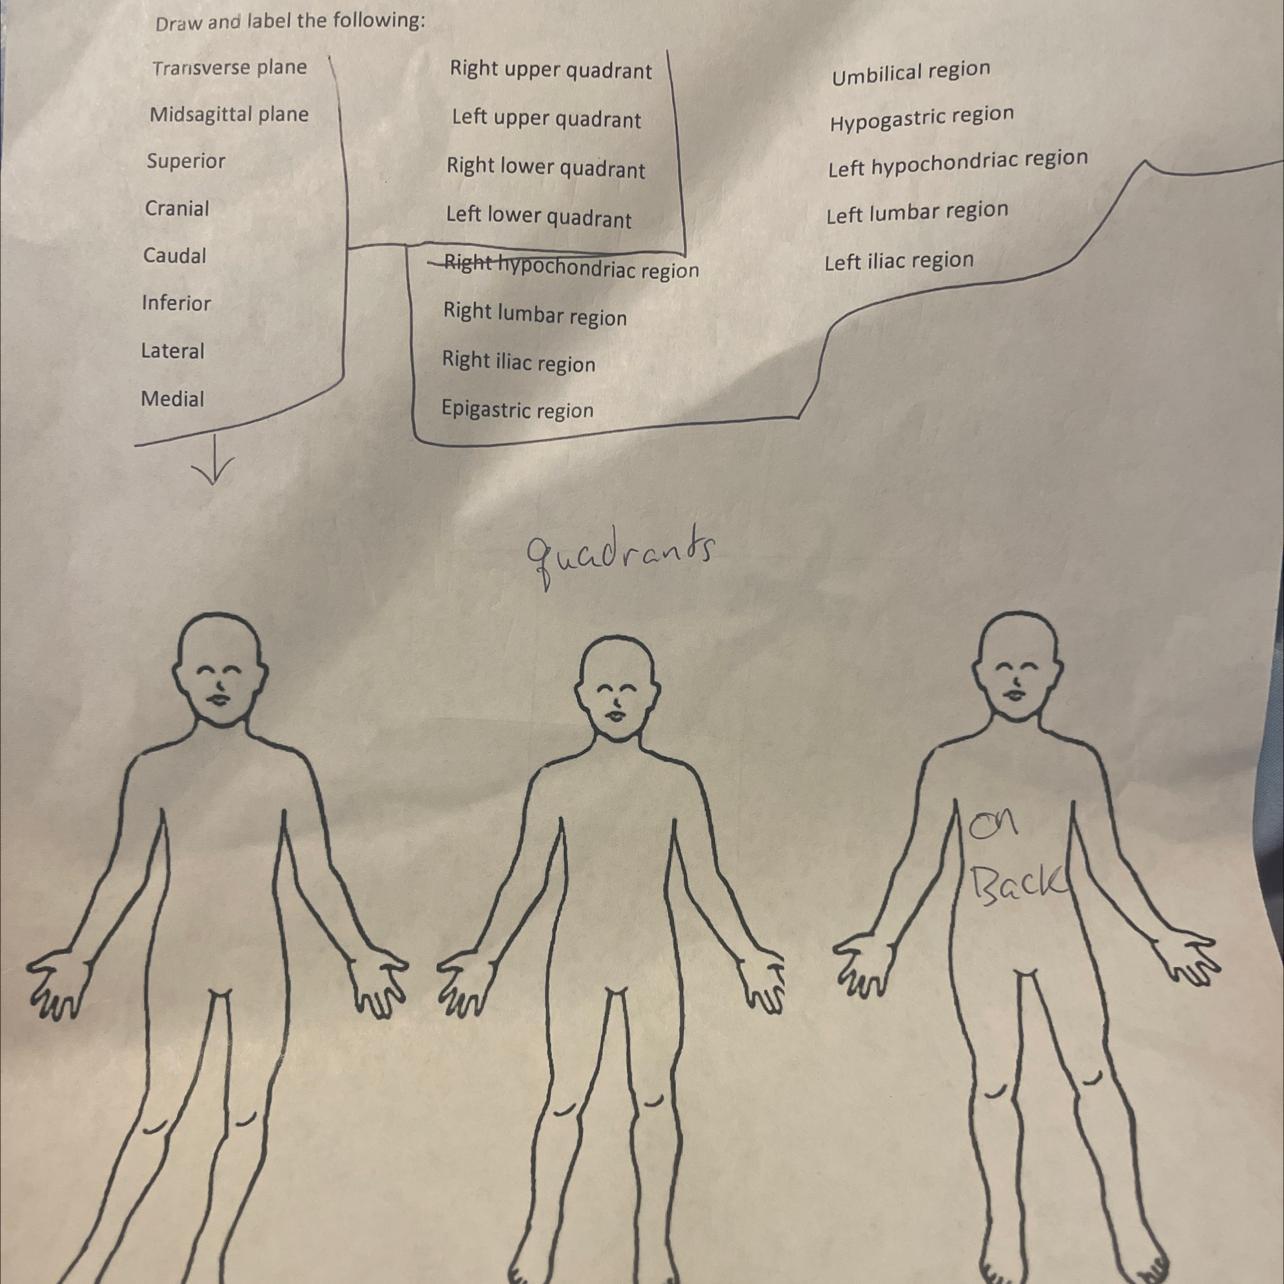 Body Planes, Directions, Quadrants And RegionsDraw And Label The Following:HELP ME PLEASE 